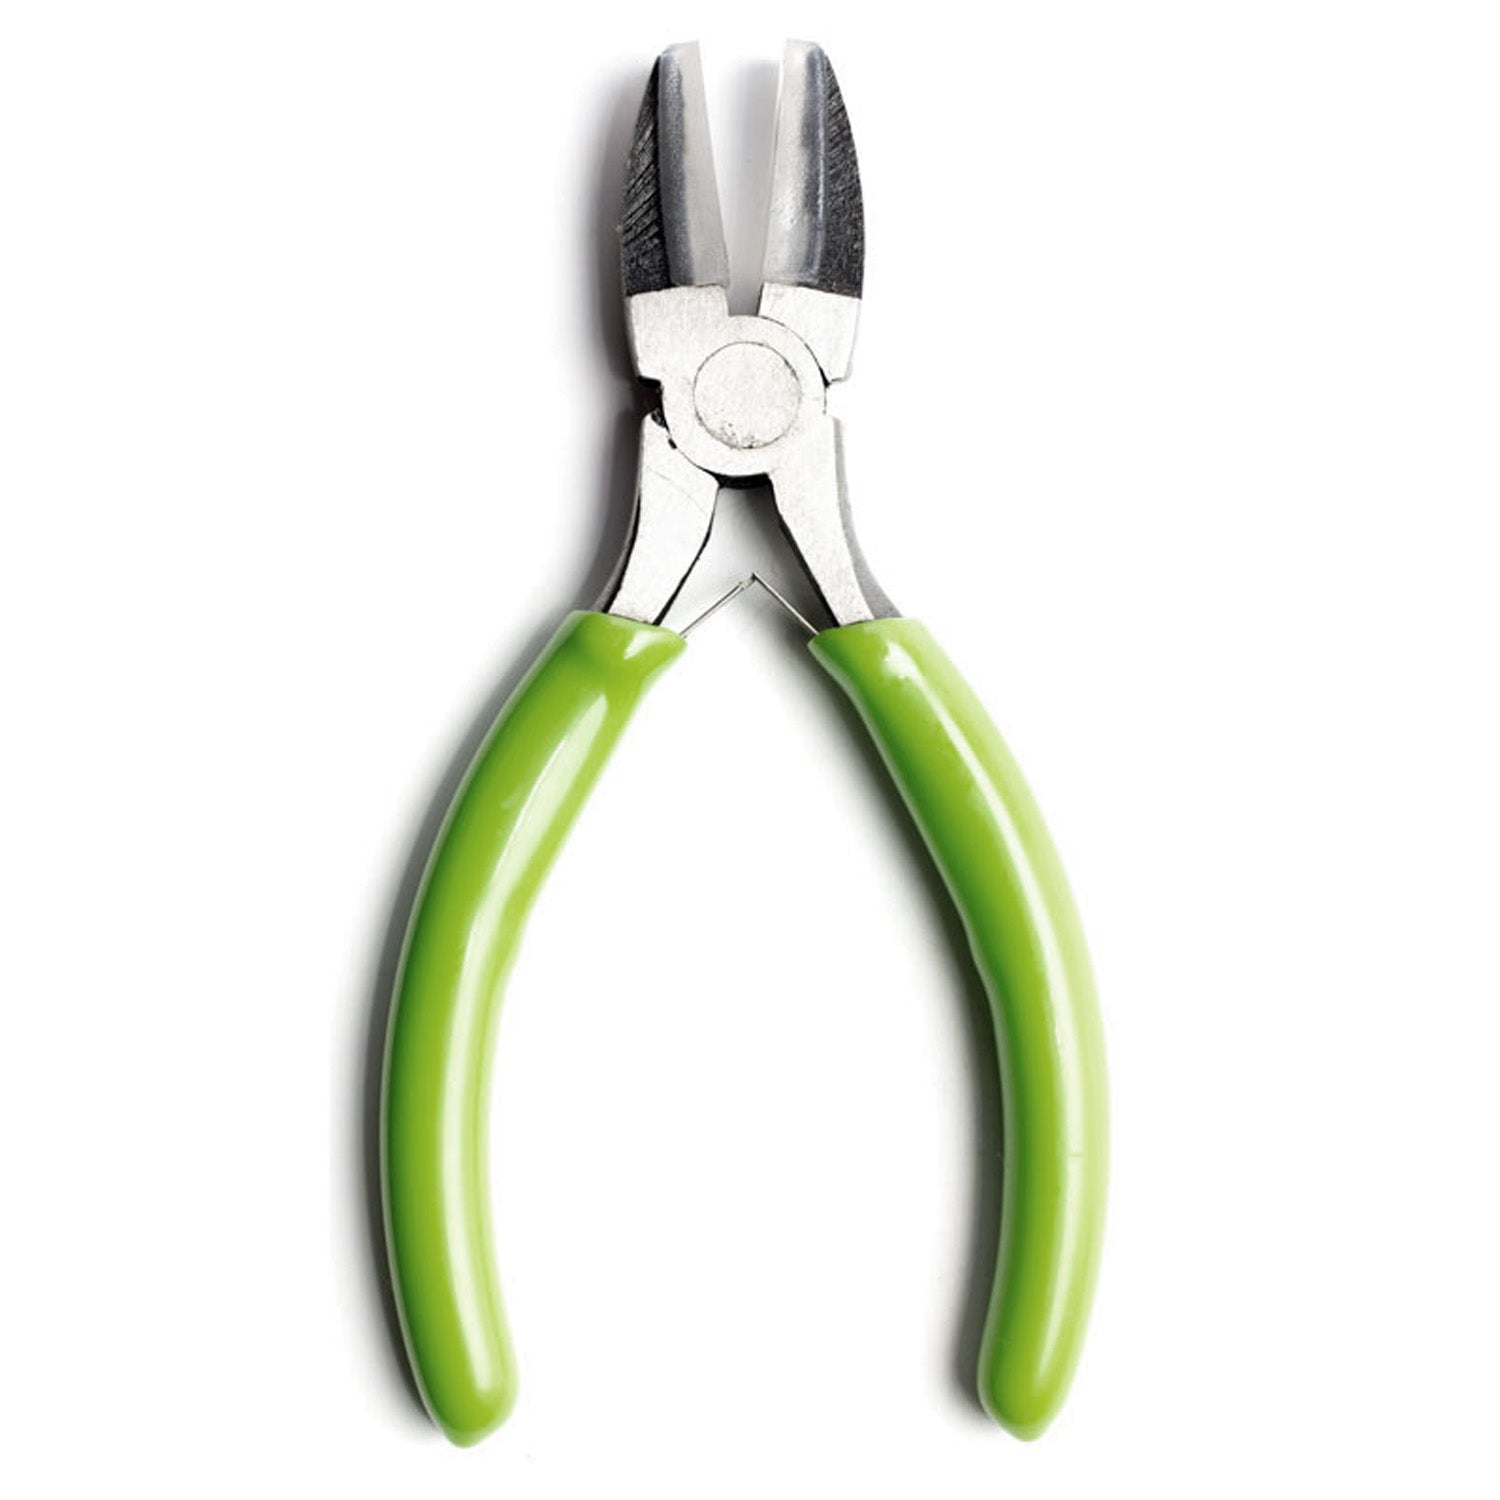 Nylon Jaw Pliers With Padded Handles, Jewelry Craft Tool